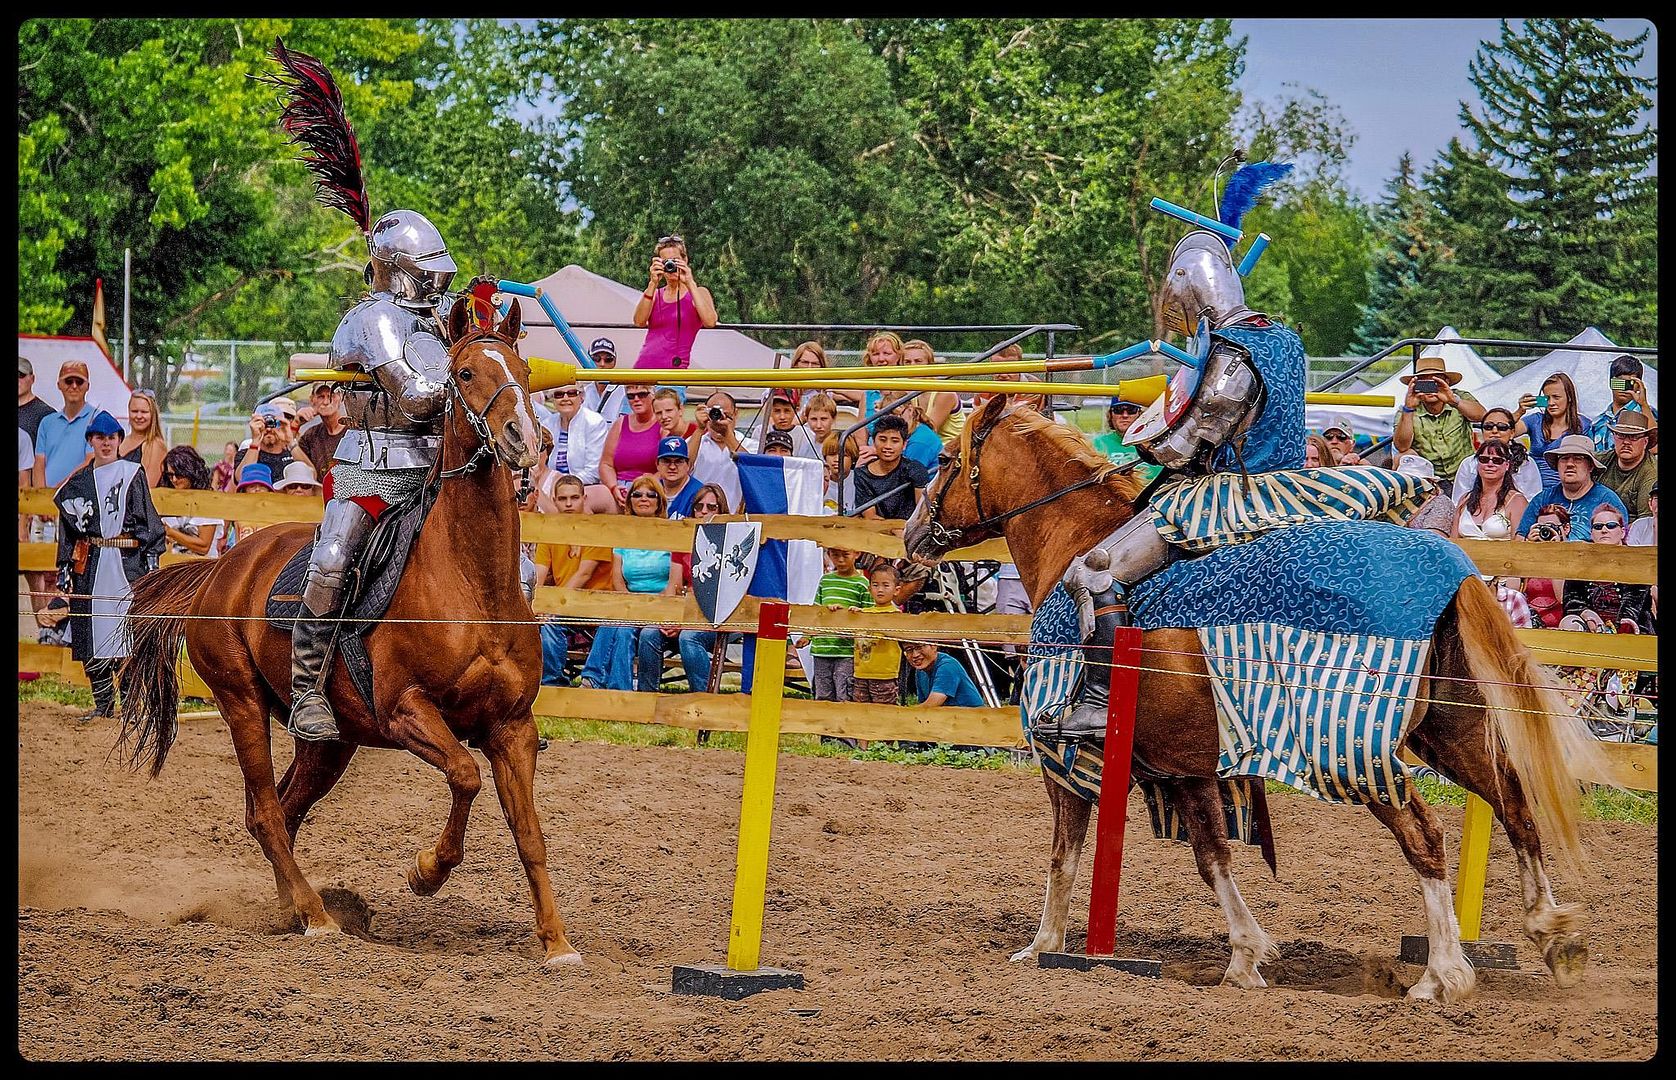 Jousters Jean Francois Drapeau of Canada and Nicola Corrarello of Italy at Brooks Medieval Faire Jousting Tournament 2014(photo by Grant Zelych)